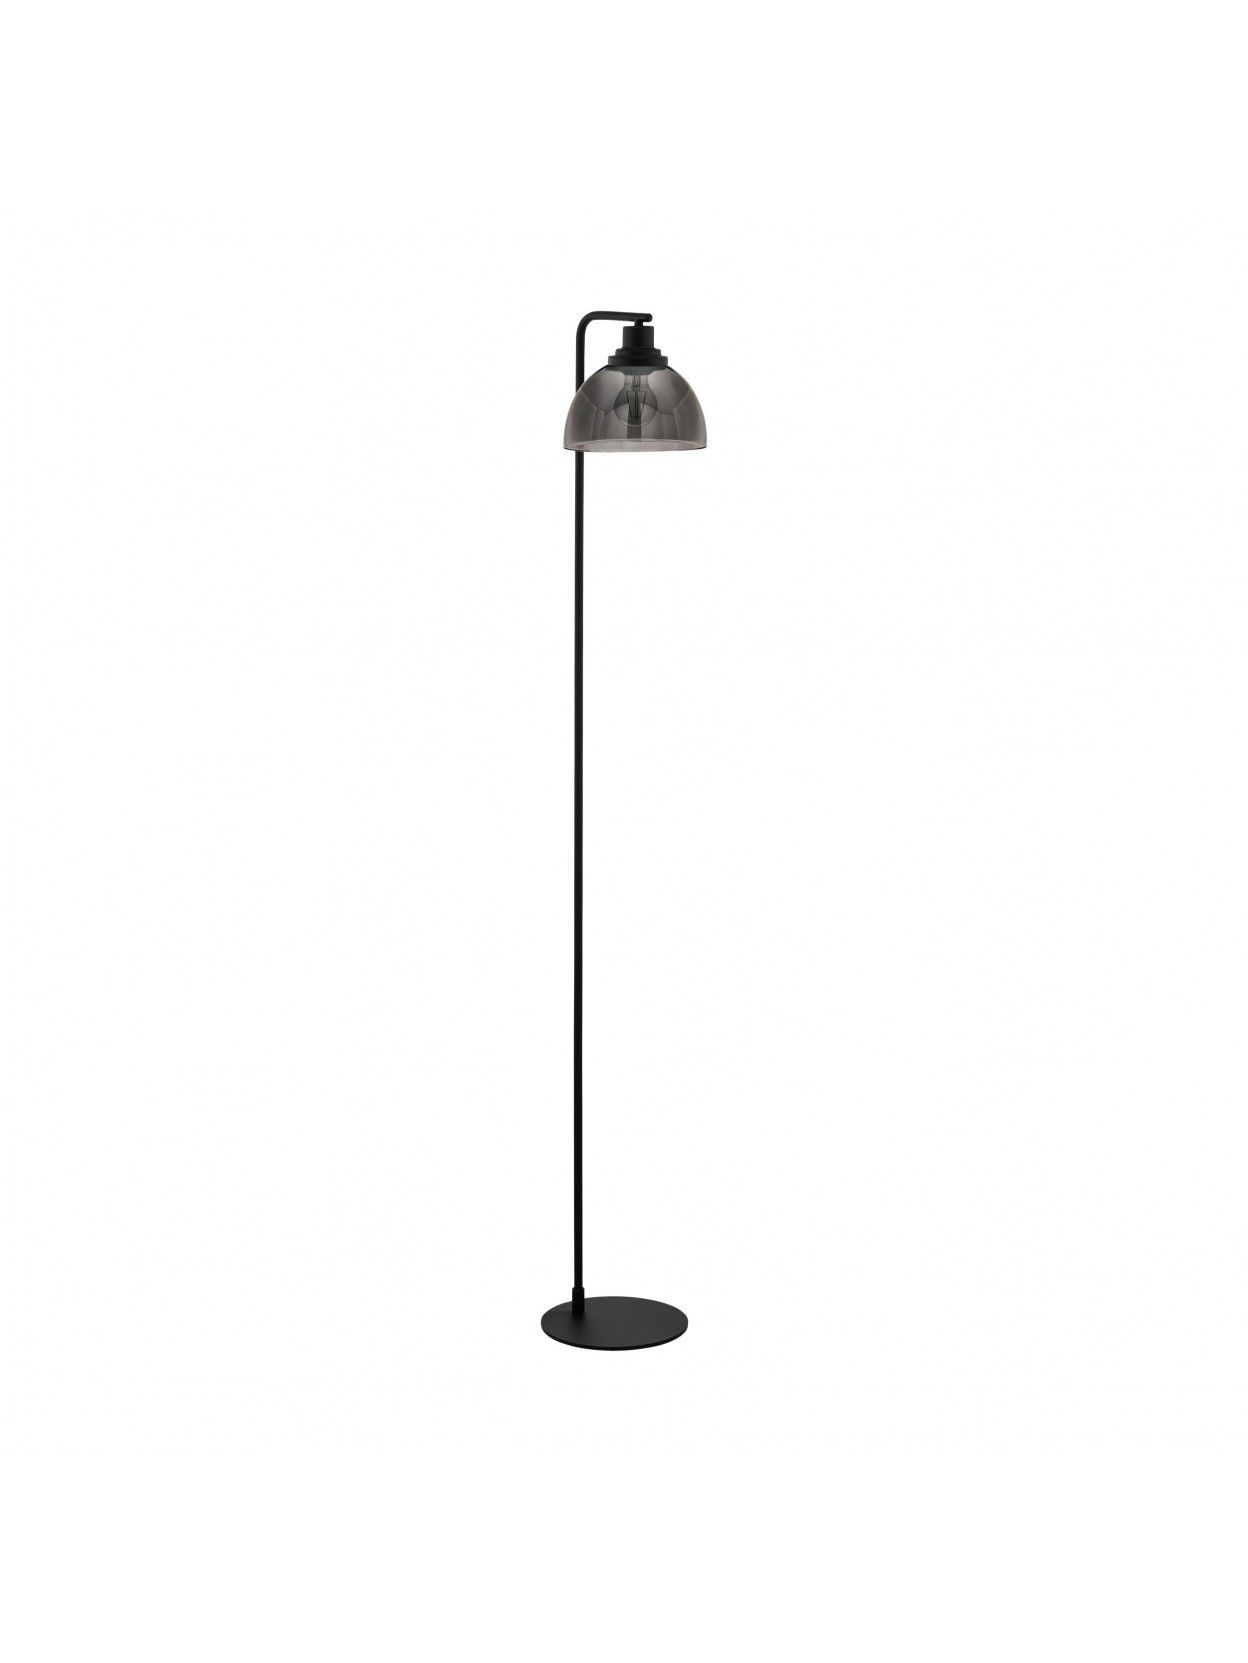 Modern Design Floor Lamp Smoked Glass 1 Light Gl0587 Pertaining To Black Floor Lamps (View 12 of 15)